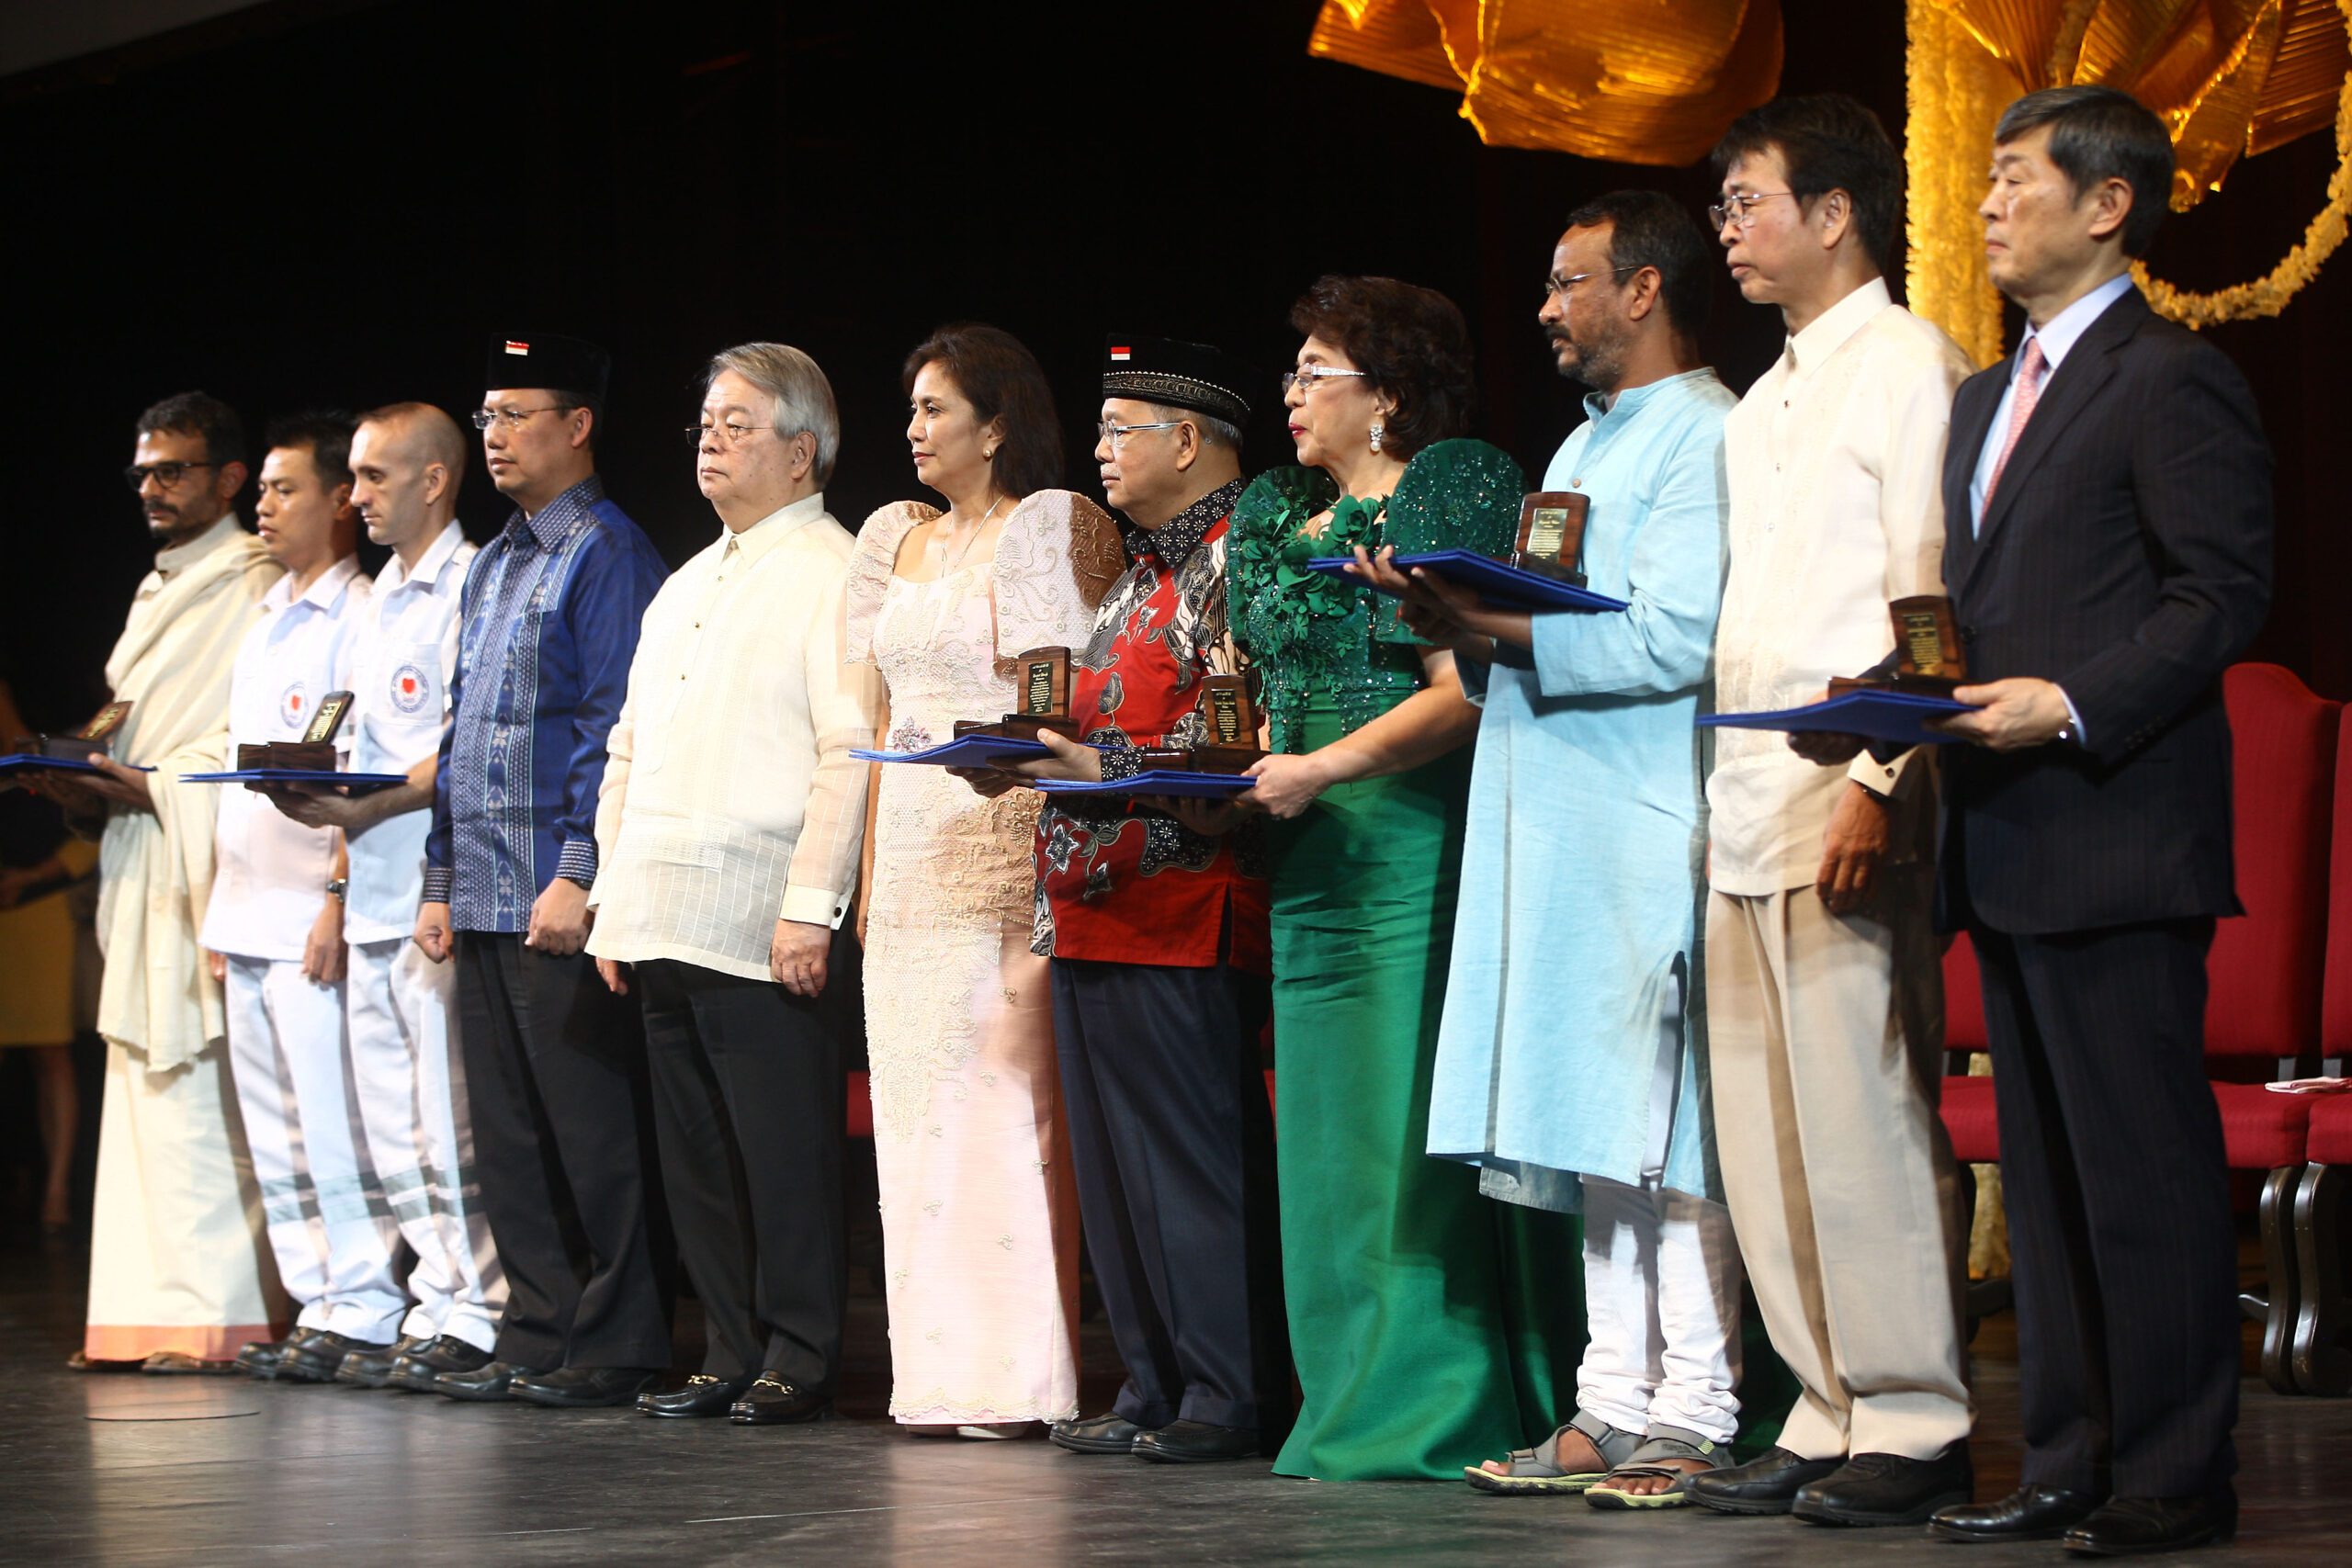 IN PHOTOS: ‘Heroes of Asia’ receive 2016 Magsaysay Awards